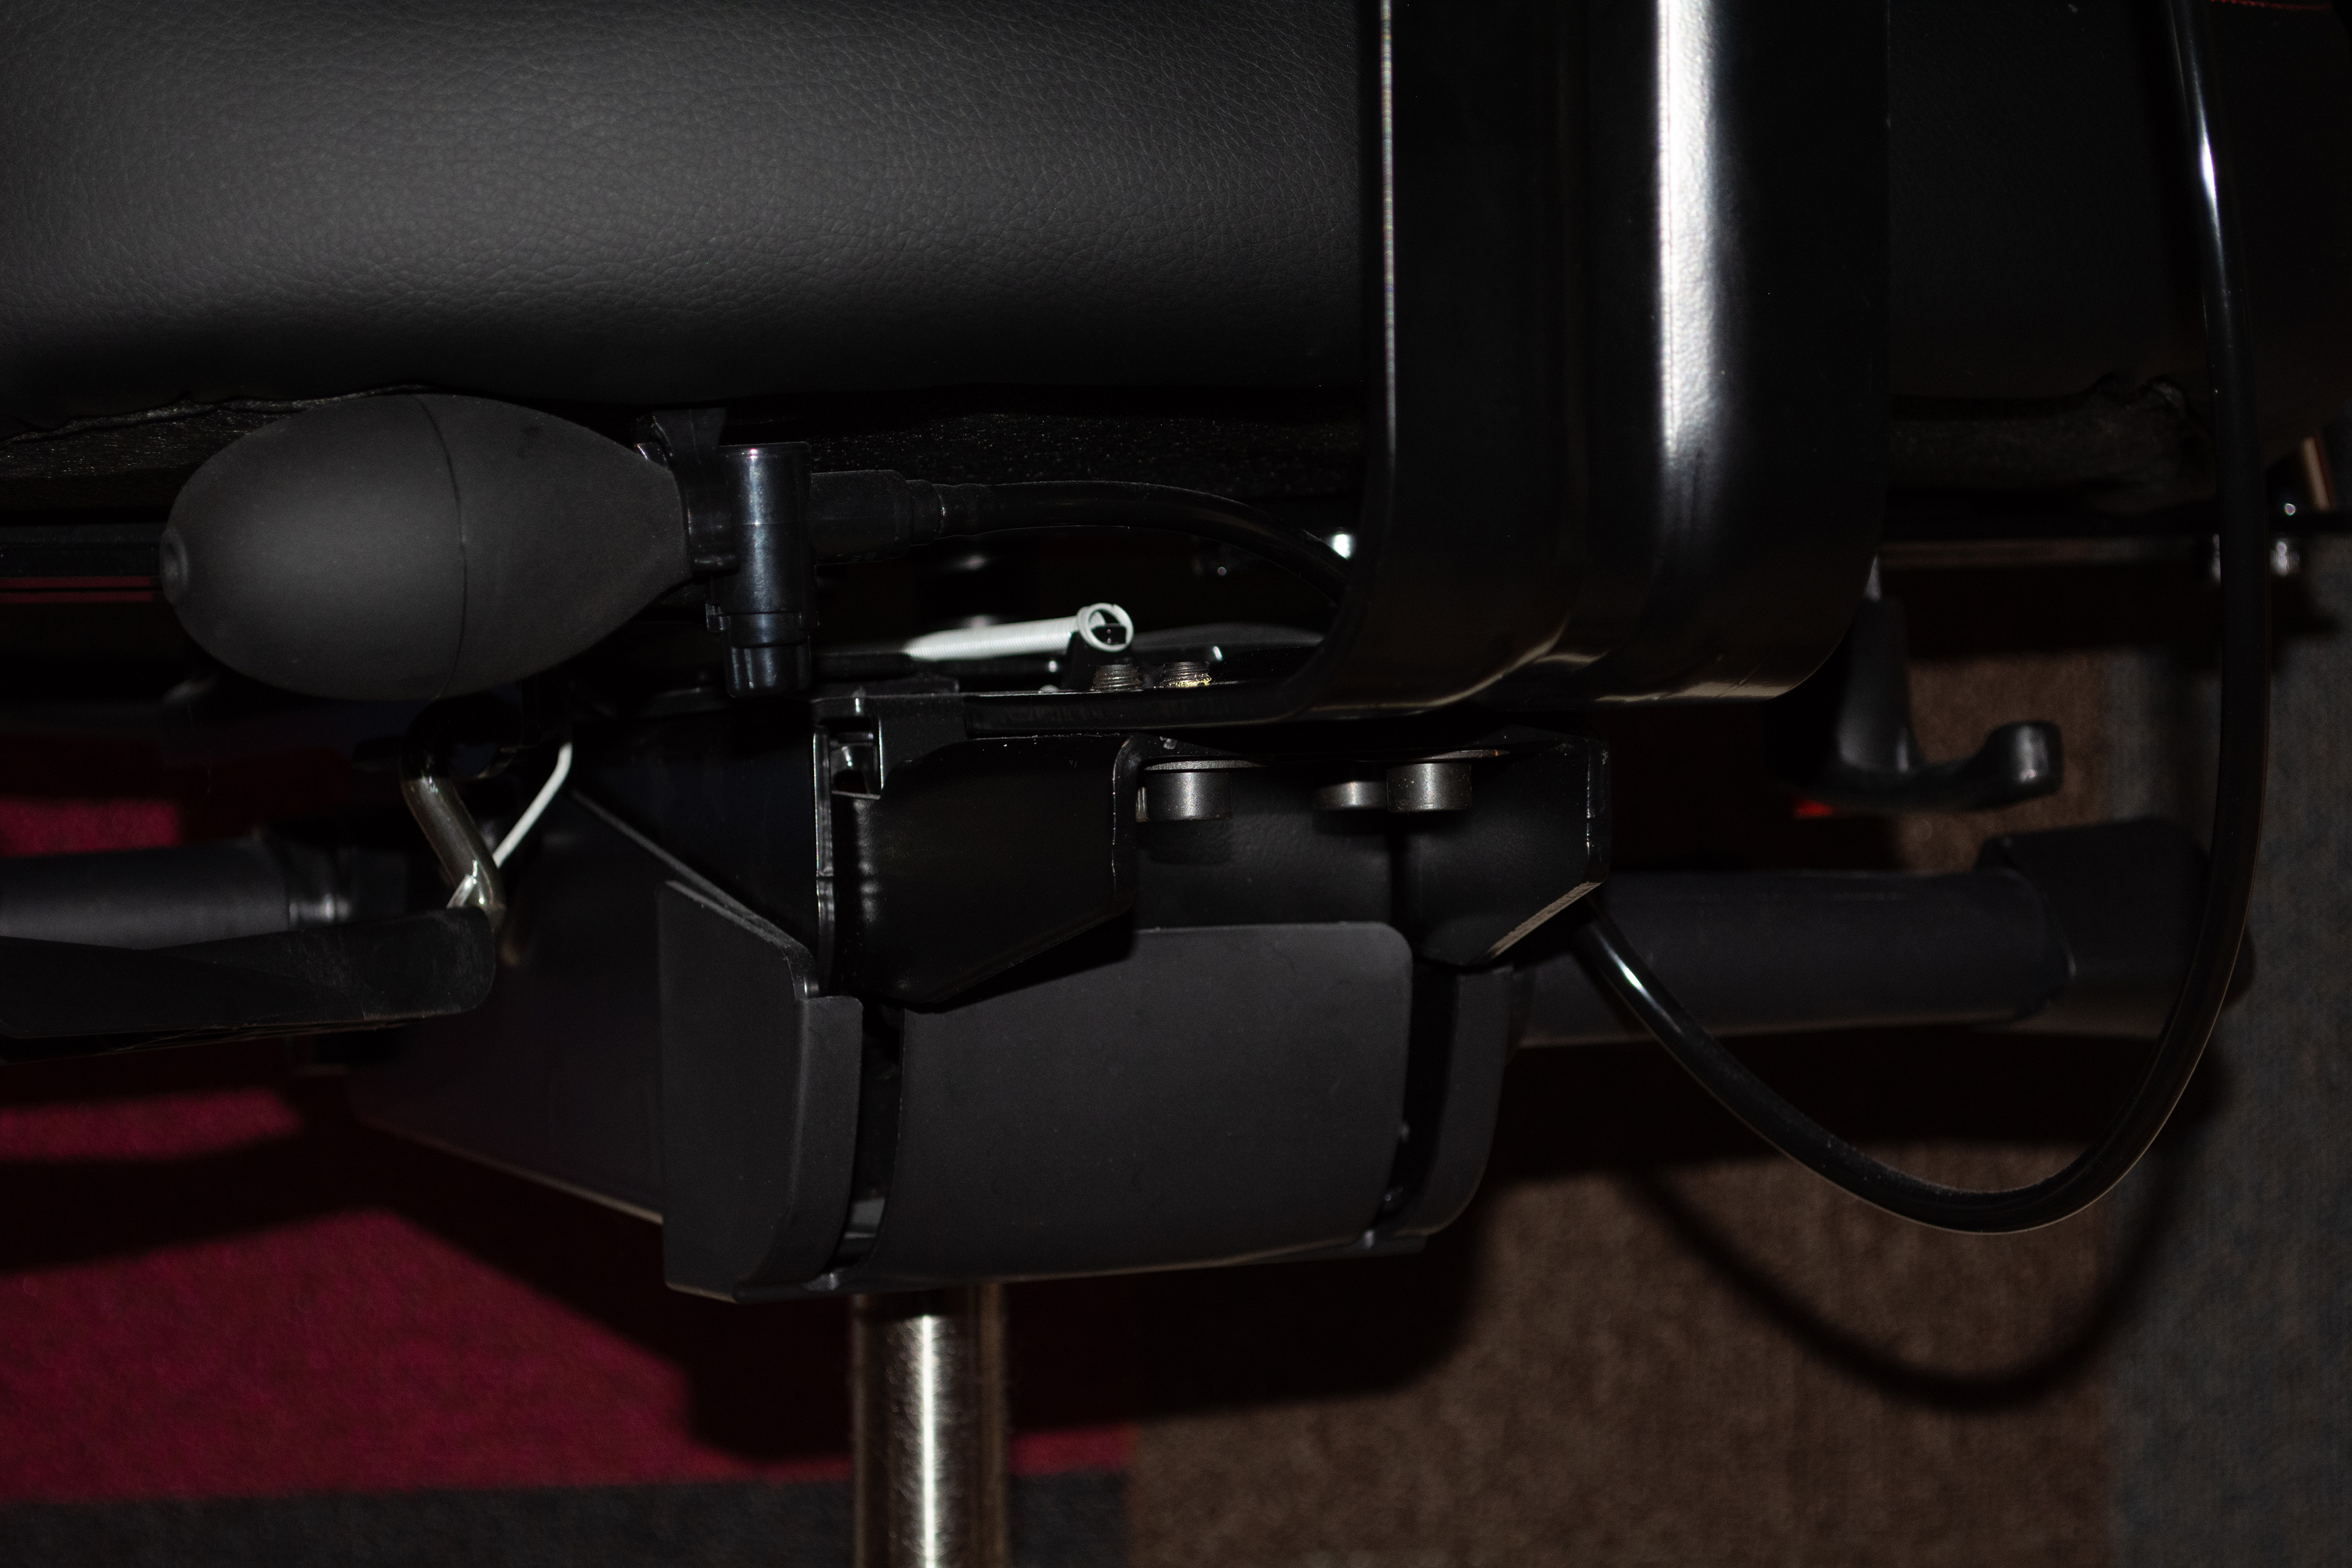 Inflatable lumbar support pump on EDGE GX1 gaming chair